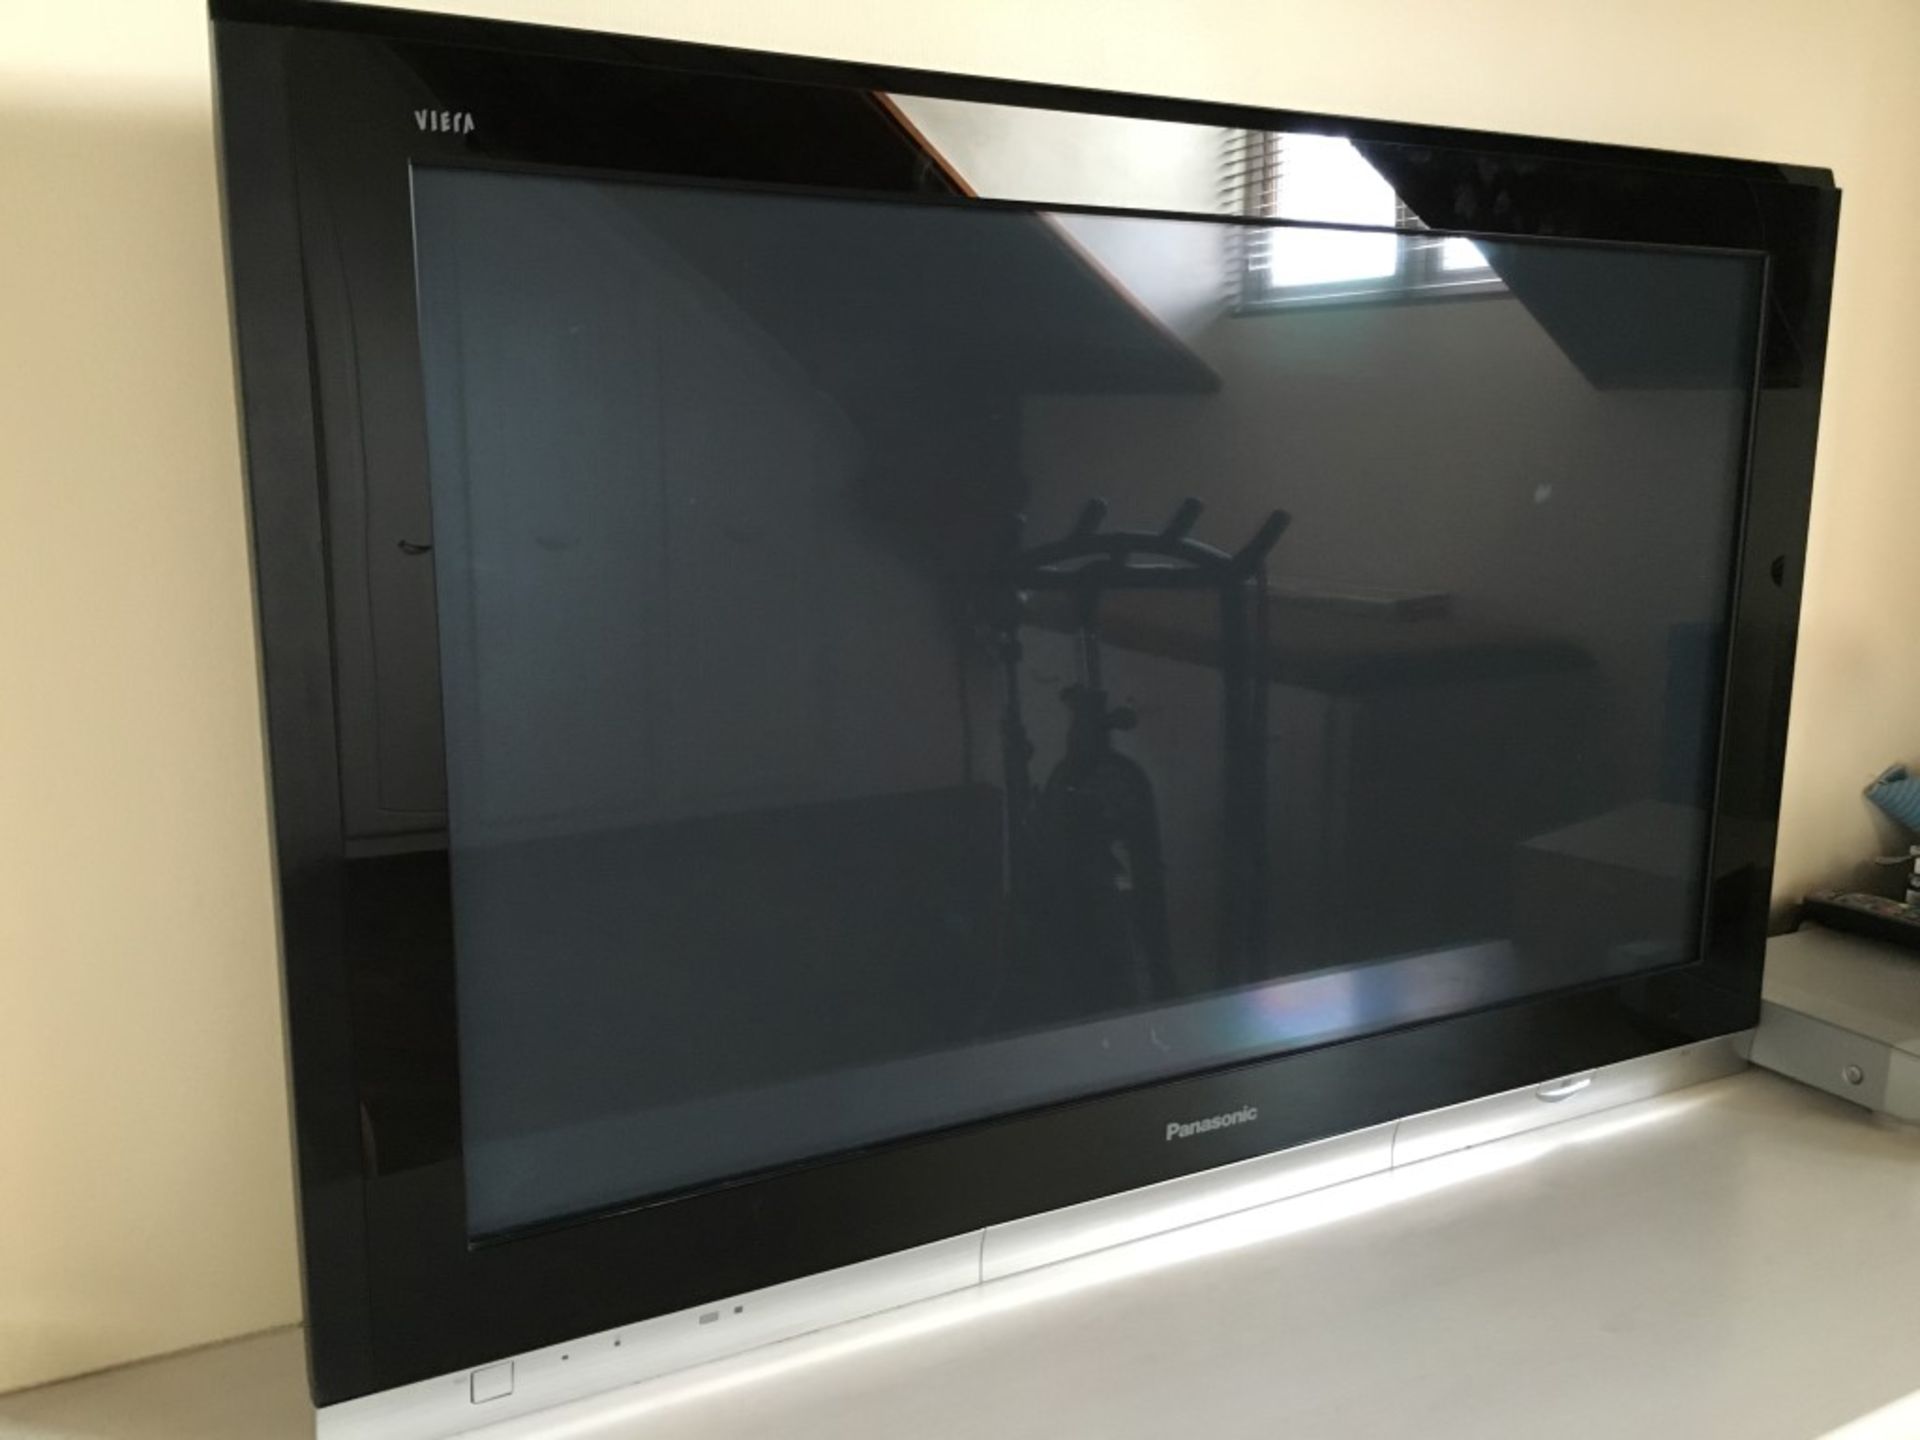 1 x 42" Panasonic Viera Plasma Television - Model: TH-42PX700B - CL130 - In Good Working Order, As